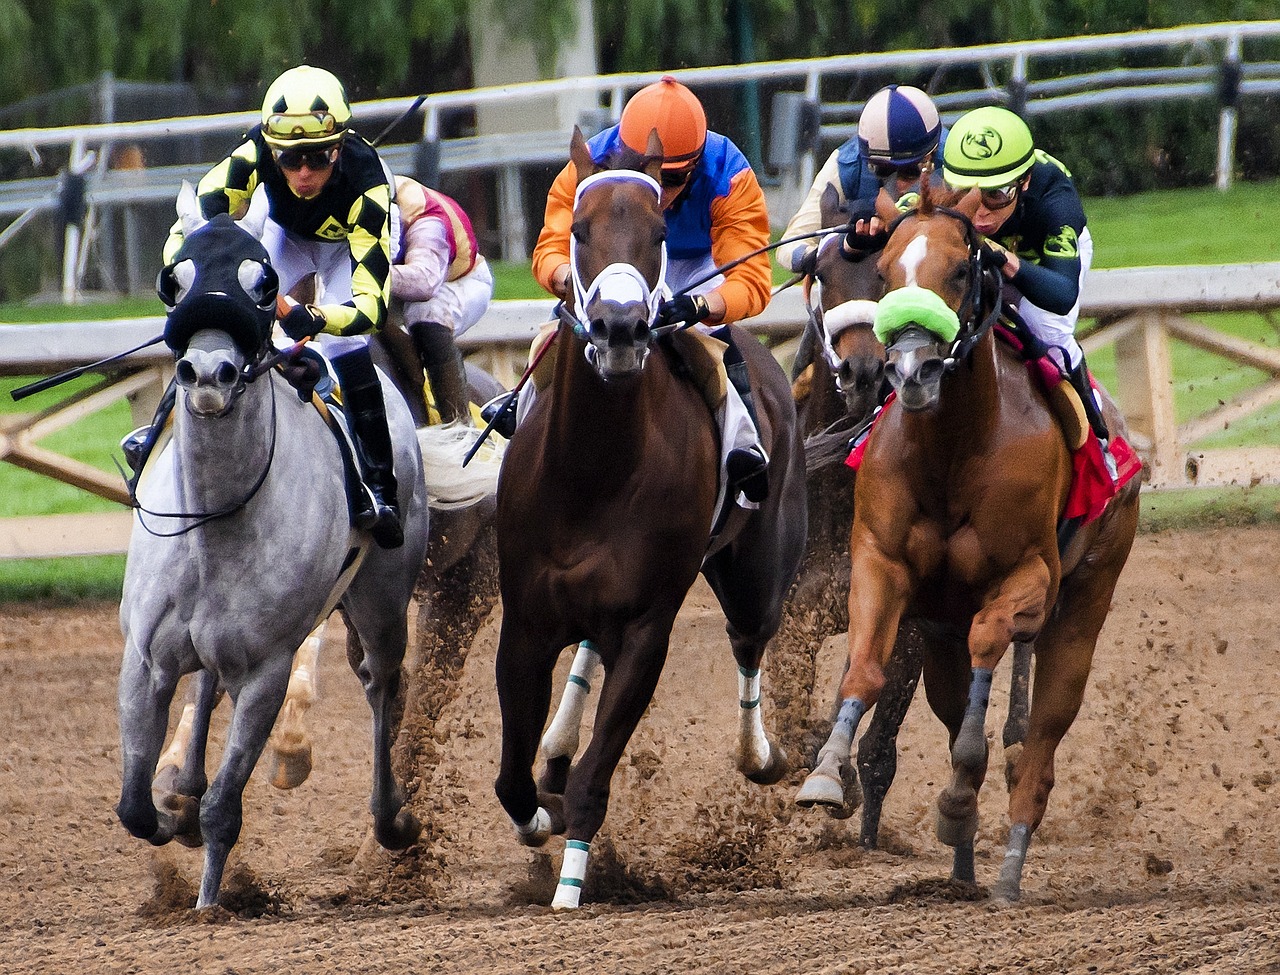 Horse Racing on a Dirt Track